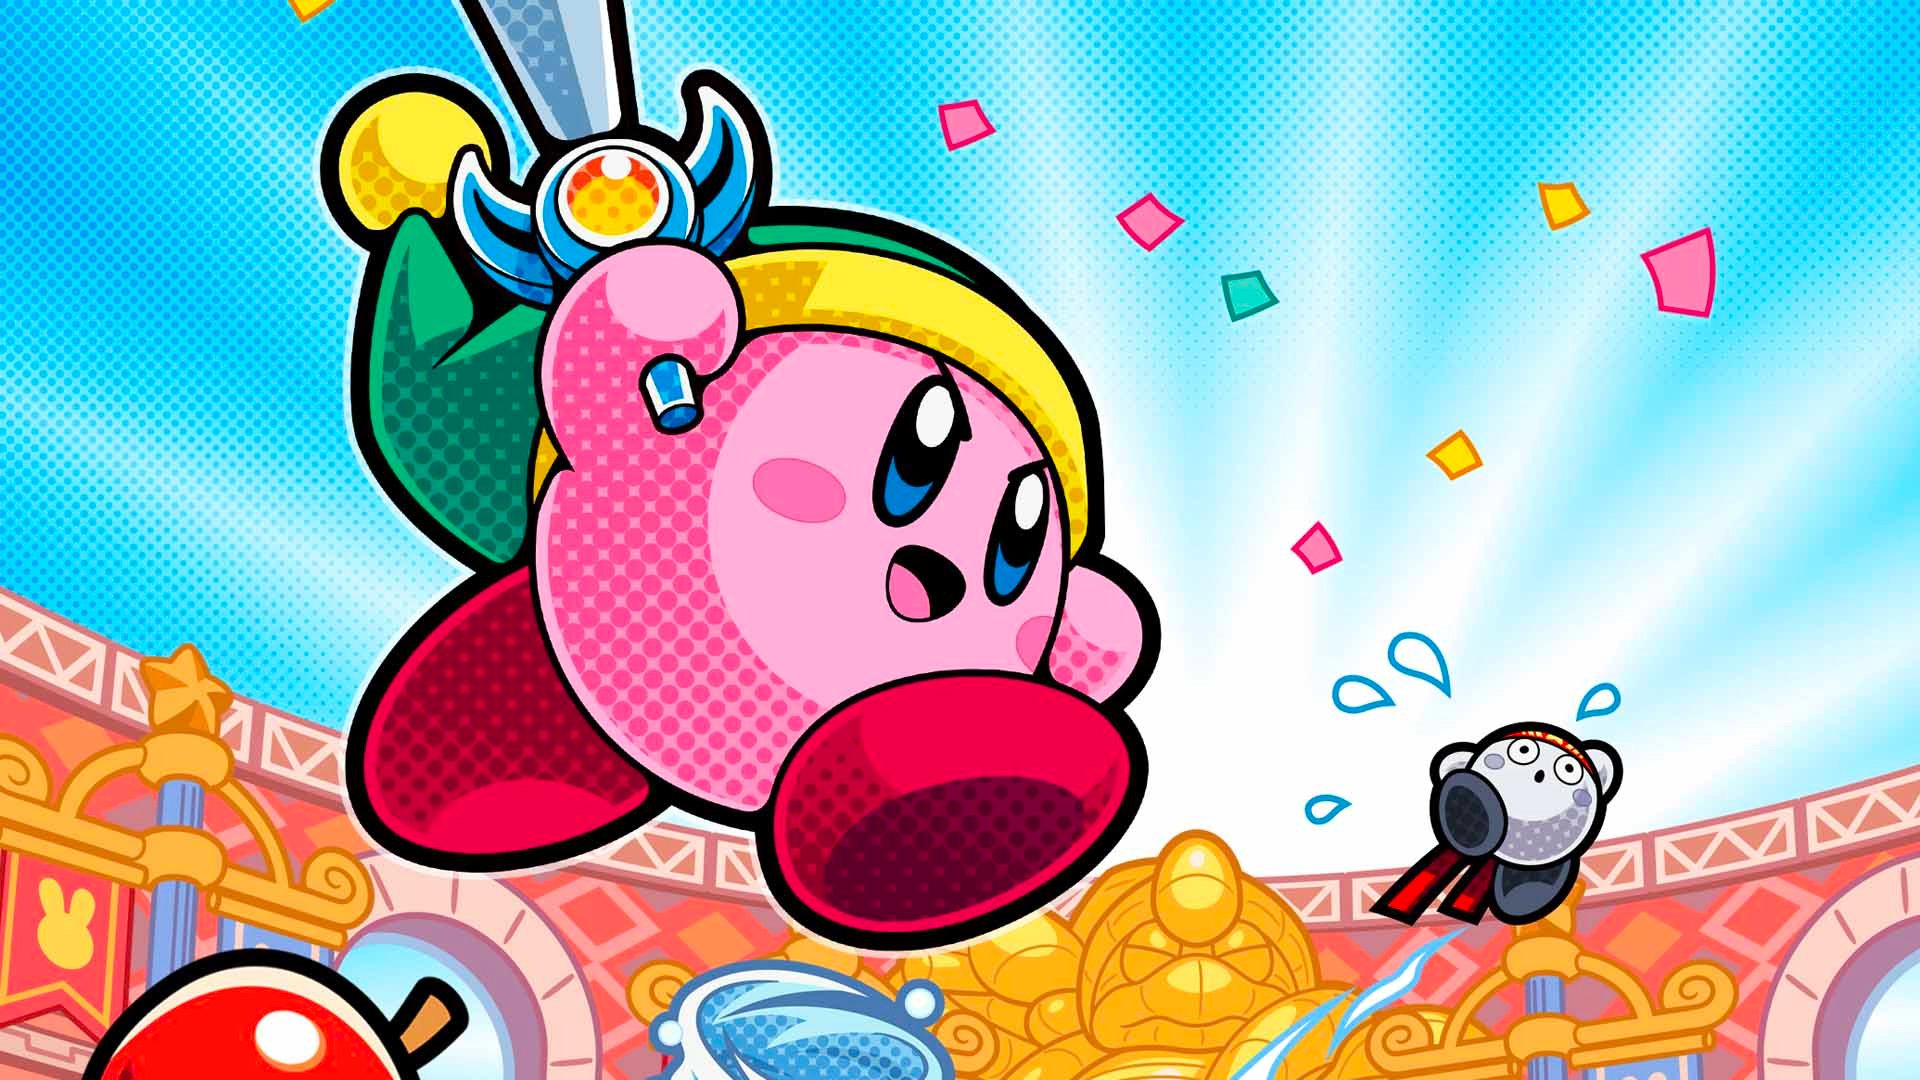 Kirby HD Backgrounds Free Download 